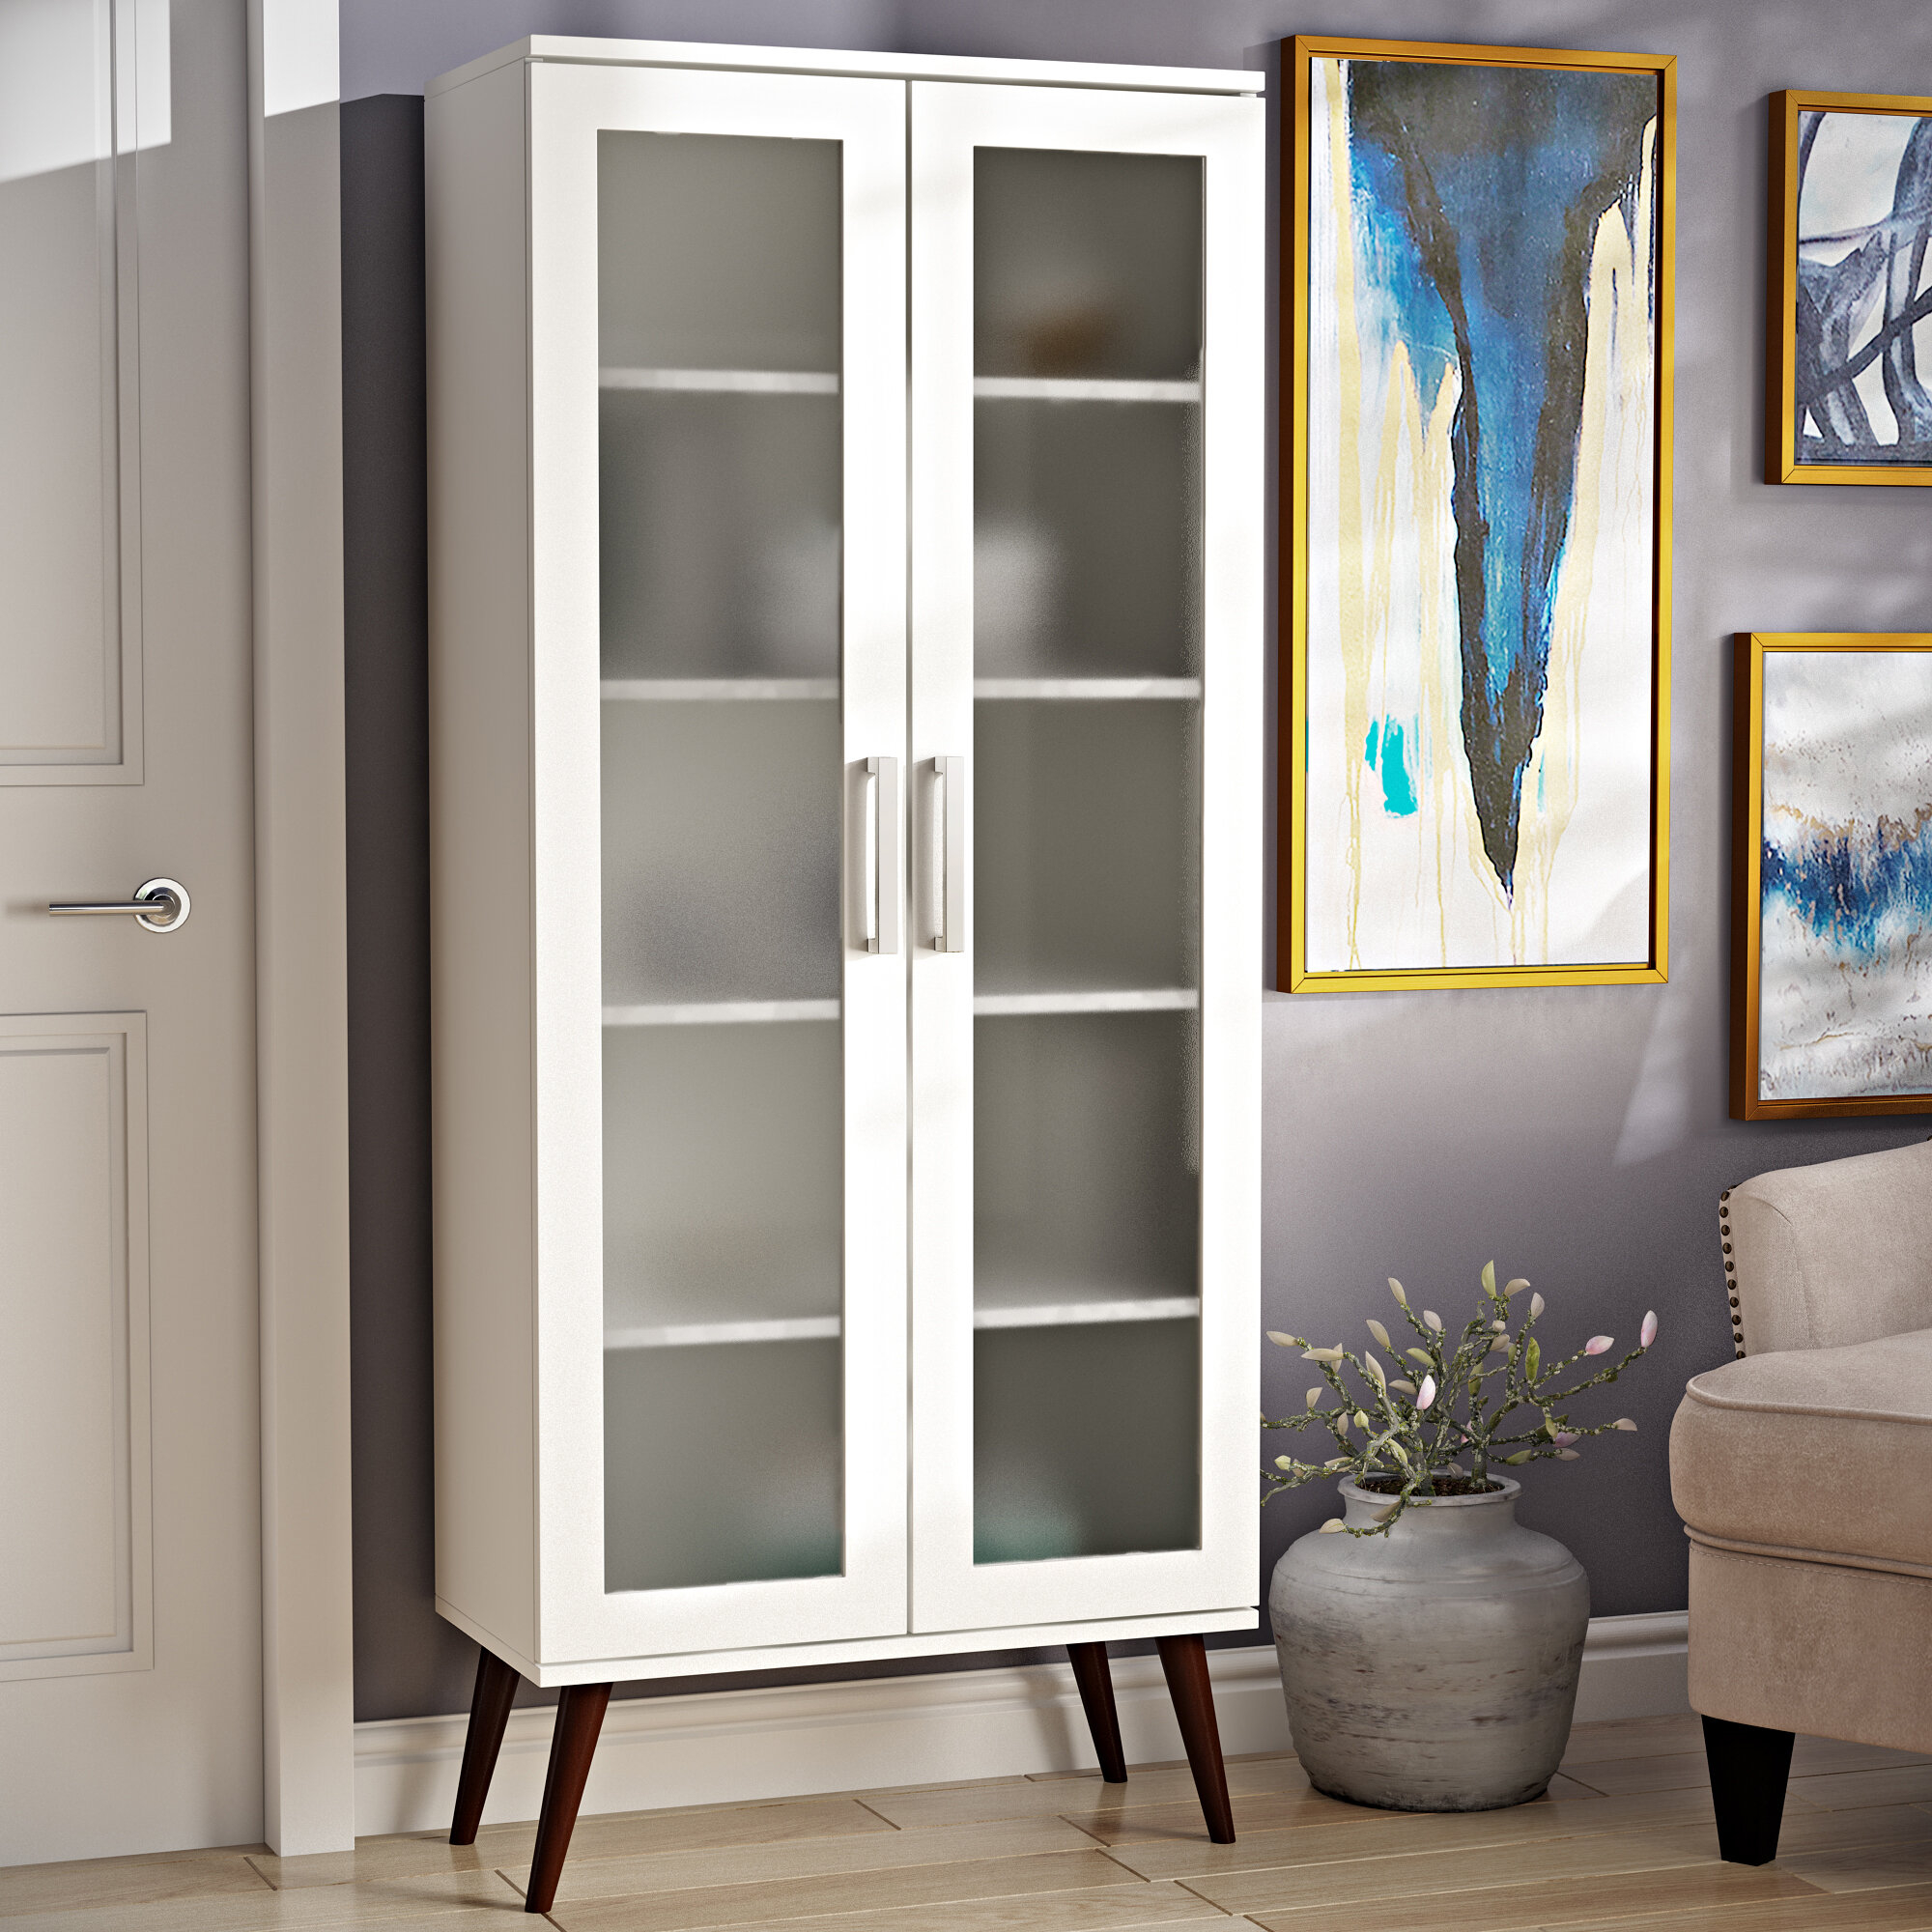 Bookcase With Glass Doors Visualhunt, Narrow White Bookcase With Glass Doors